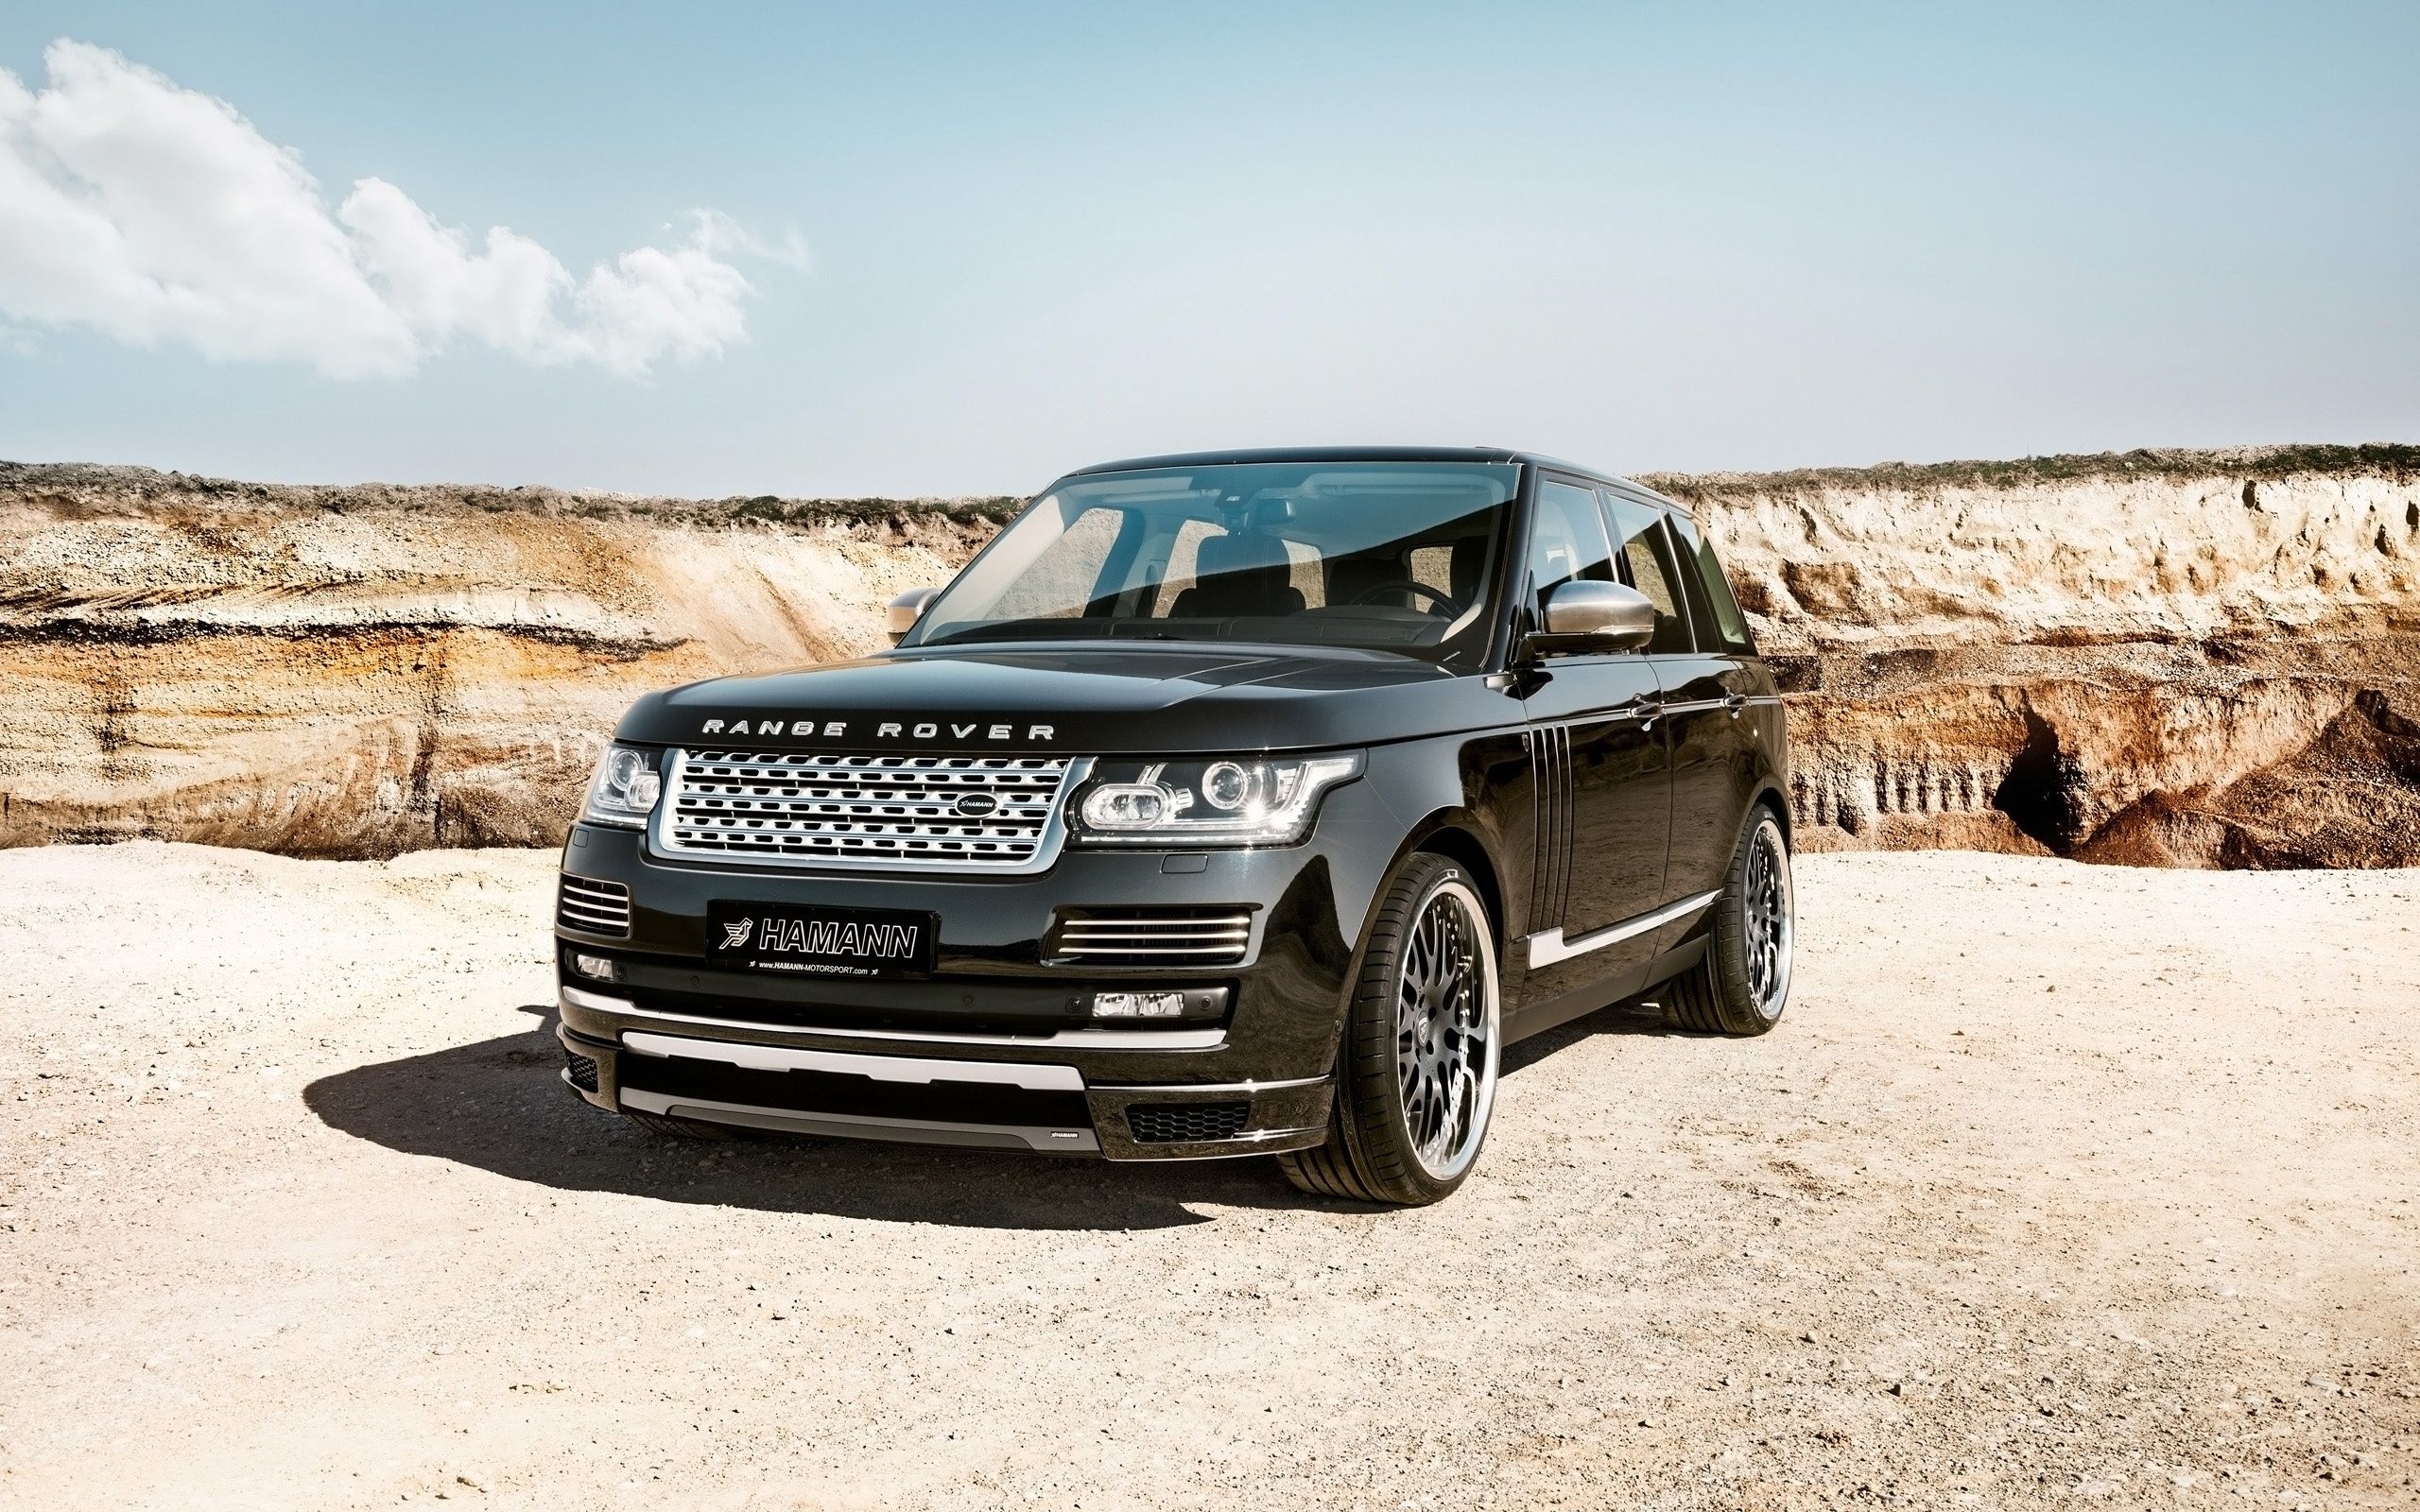 Awesome Land Rover Range Rover Wallpaper | Full HD Pictures